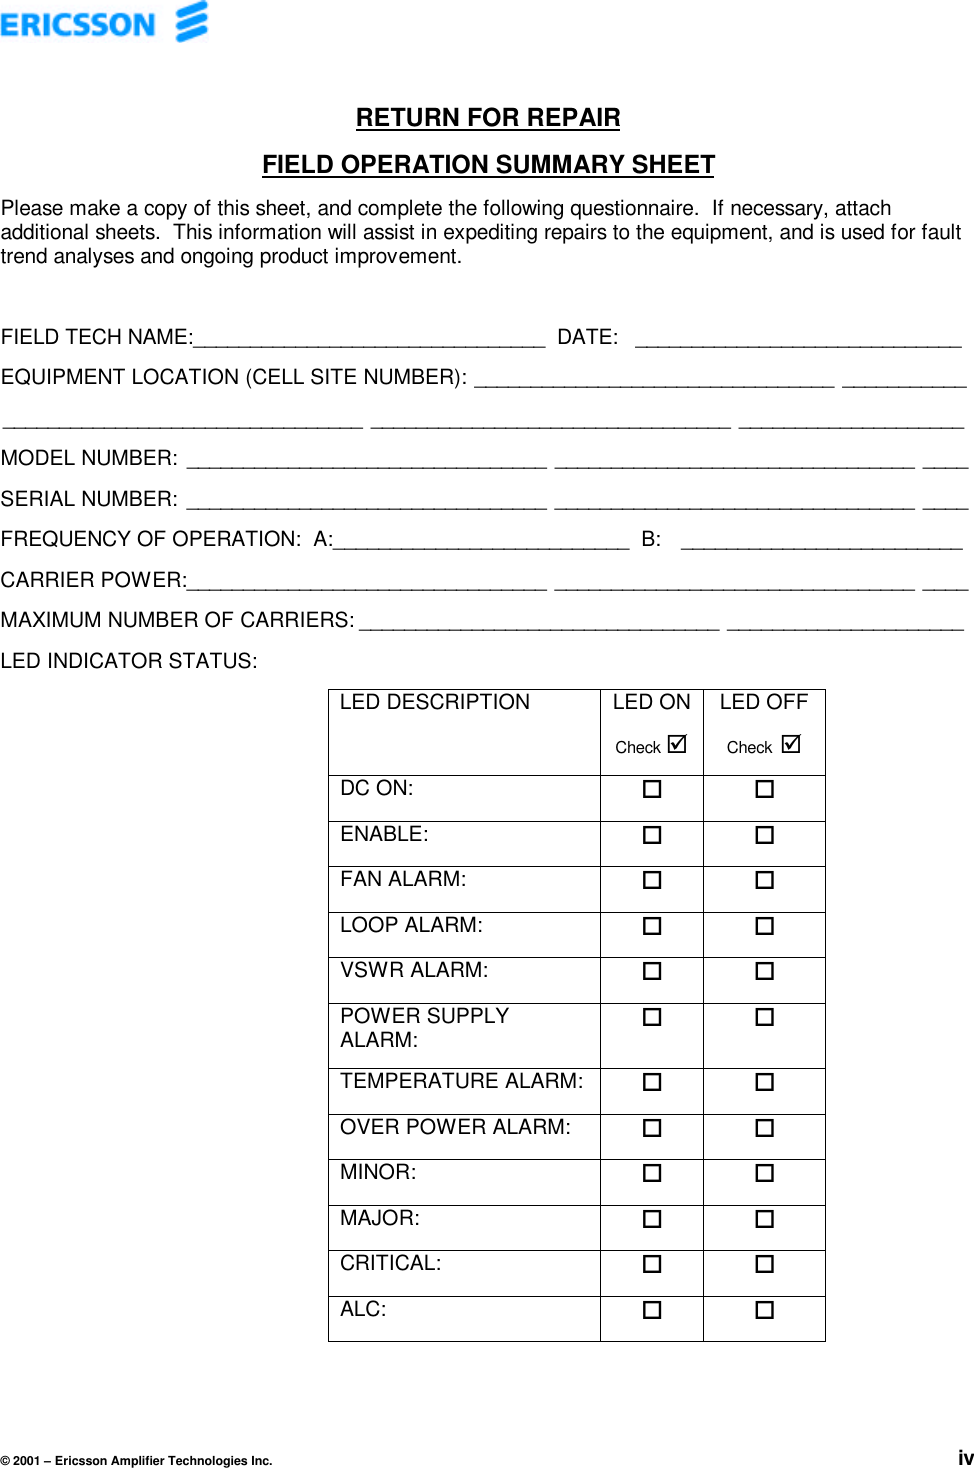 © 2001 – Ericsson Amplifier Technologies Inc. ivRETURN FOR REPAIRFIELD OPERATION SUMMARY SHEETPlease make a copy of this sheet, and complete the following questionnaire.  If necessary, attachadditional sheets.  This information will assist in expediting repairs to the equipment, and is used for faulttrend analyses and ongoing product improvement.FIELD TECH NAME:_______________________________  DATE: _____________________________EQUIPMENT LOCATION (CELL SITE NUMBER): ________________________________ ___________________________________________ ________________________________ ____________________MODEL NUMBER: ________________________________ ________________________________ ____SERIAL NUMBER: ________________________________ ________________________________ ____FREQUENCY OF OPERATION:  A:__________________________  B:  _________________________CARRIER POWER:________________________________ ________________________________ ____MAXIMUM NUMBER OF CARRIERS: ________________________________ _____________________LED INDICATOR STATUS:LED DESCRIPTION LED ONCheck þLED OFFCheck þDC ON: o oENABLE: o oFAN ALARM: o oLOOP ALARM: o oVSWR ALARM: o oPOWER SUPPLYALARM:o oTEMPERATURE ALARM: o oOVER POWER ALARM: o oMINOR: o oMAJOR: o oCRITICAL: o oALC: o o